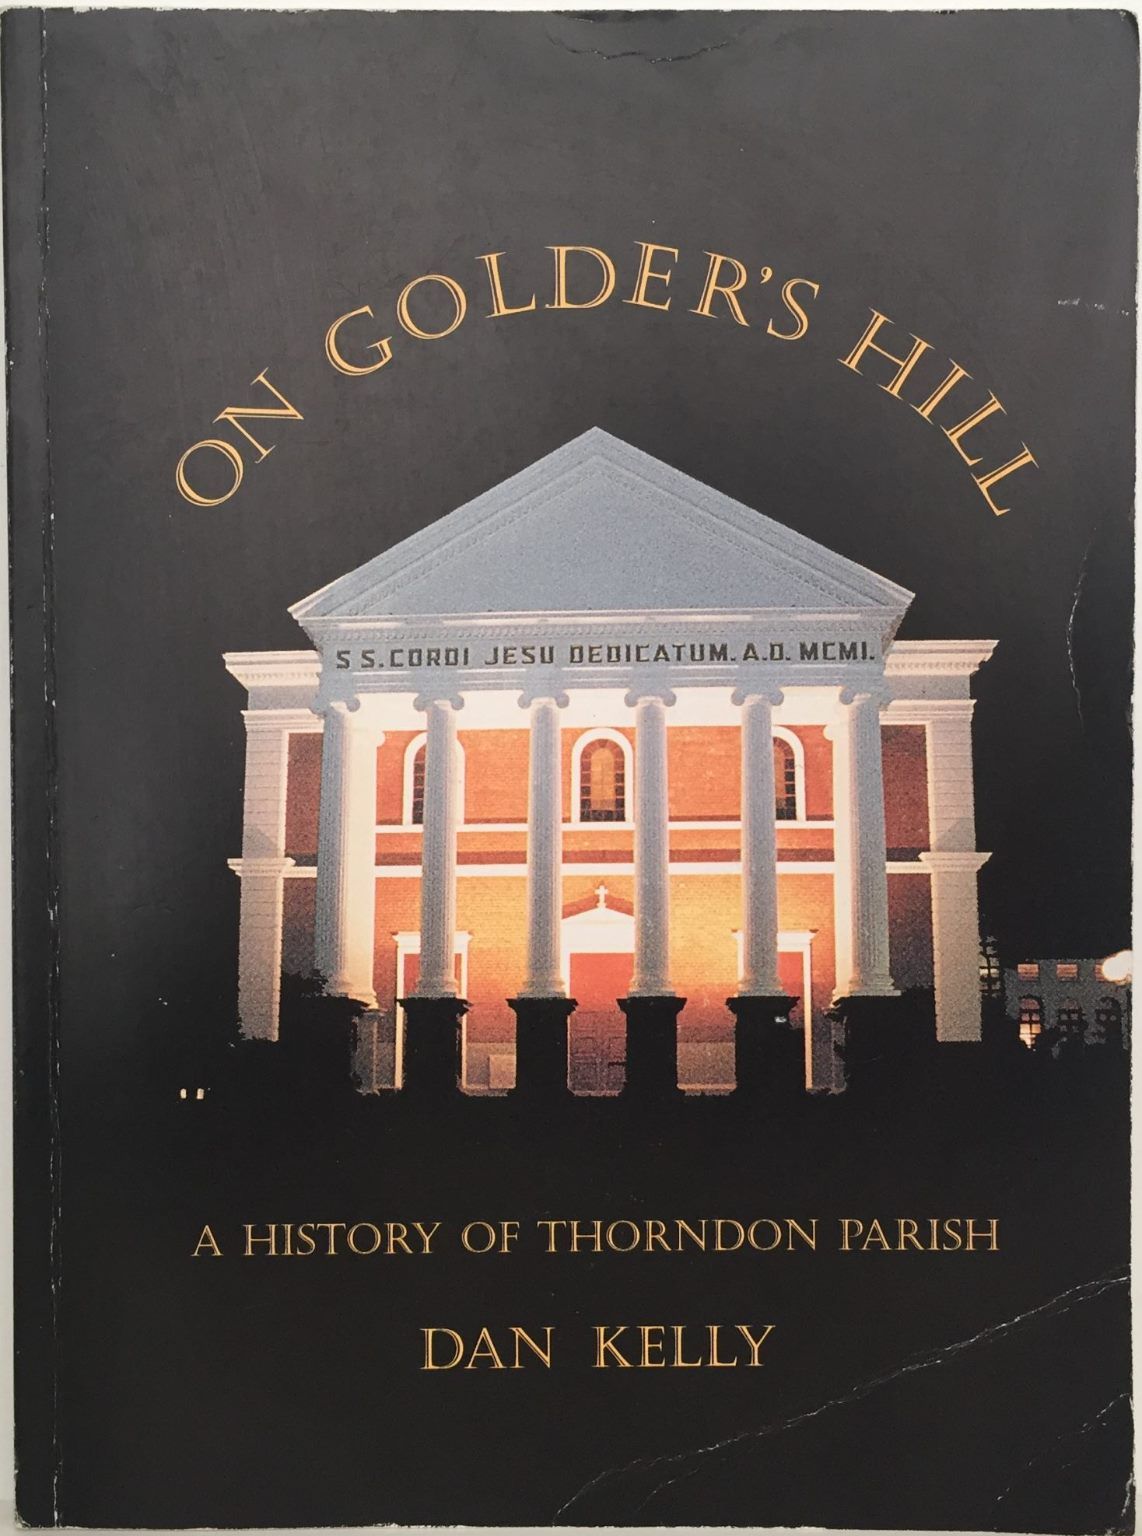 ON GOLDER'S HILL: A History of Thorndon Parish